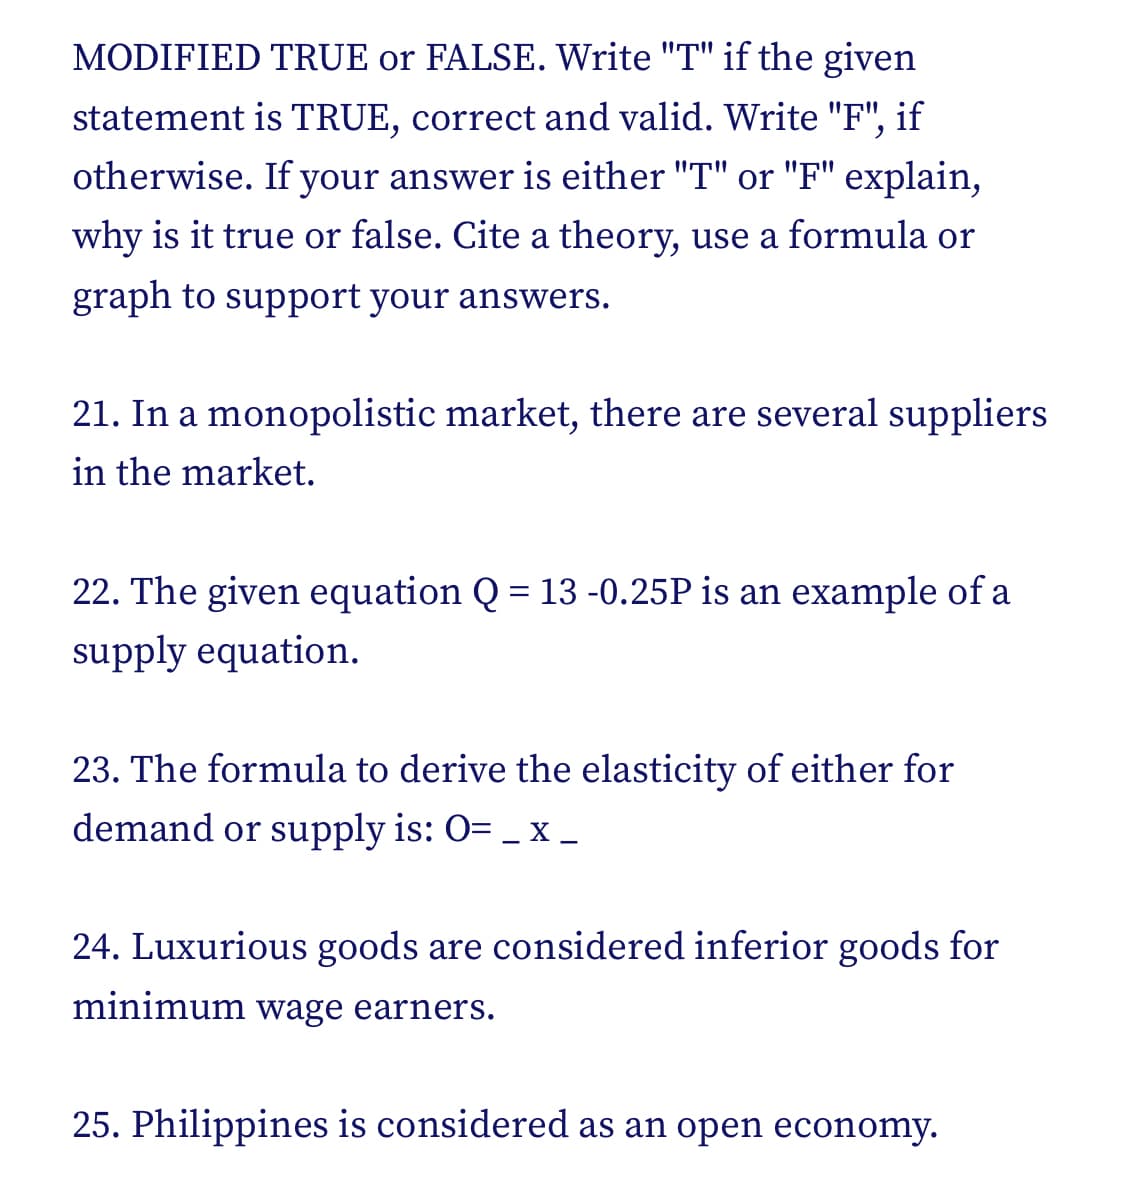 MODIFIED TRUE or FALSE. Write "T" if the given
statement is TRUE, correct and valid. Write "F", if
otherwise. If your answer is either "T" or "F" explain,
why is it true or false. Cite a theory, use a formula or
graph to support your answers.
21. In a monopolistic market, there are several suppliers
in the market.
22. The given equation Q = 13-0.25P is an example of a
supply equation.
23. The formula to derive the elasticity of either for
demand or supply is: O= _ :
X -
24. Luxurious goods are considered inferior goods for
minimum wage earners.
25. Philippines is considered as an open economy.
